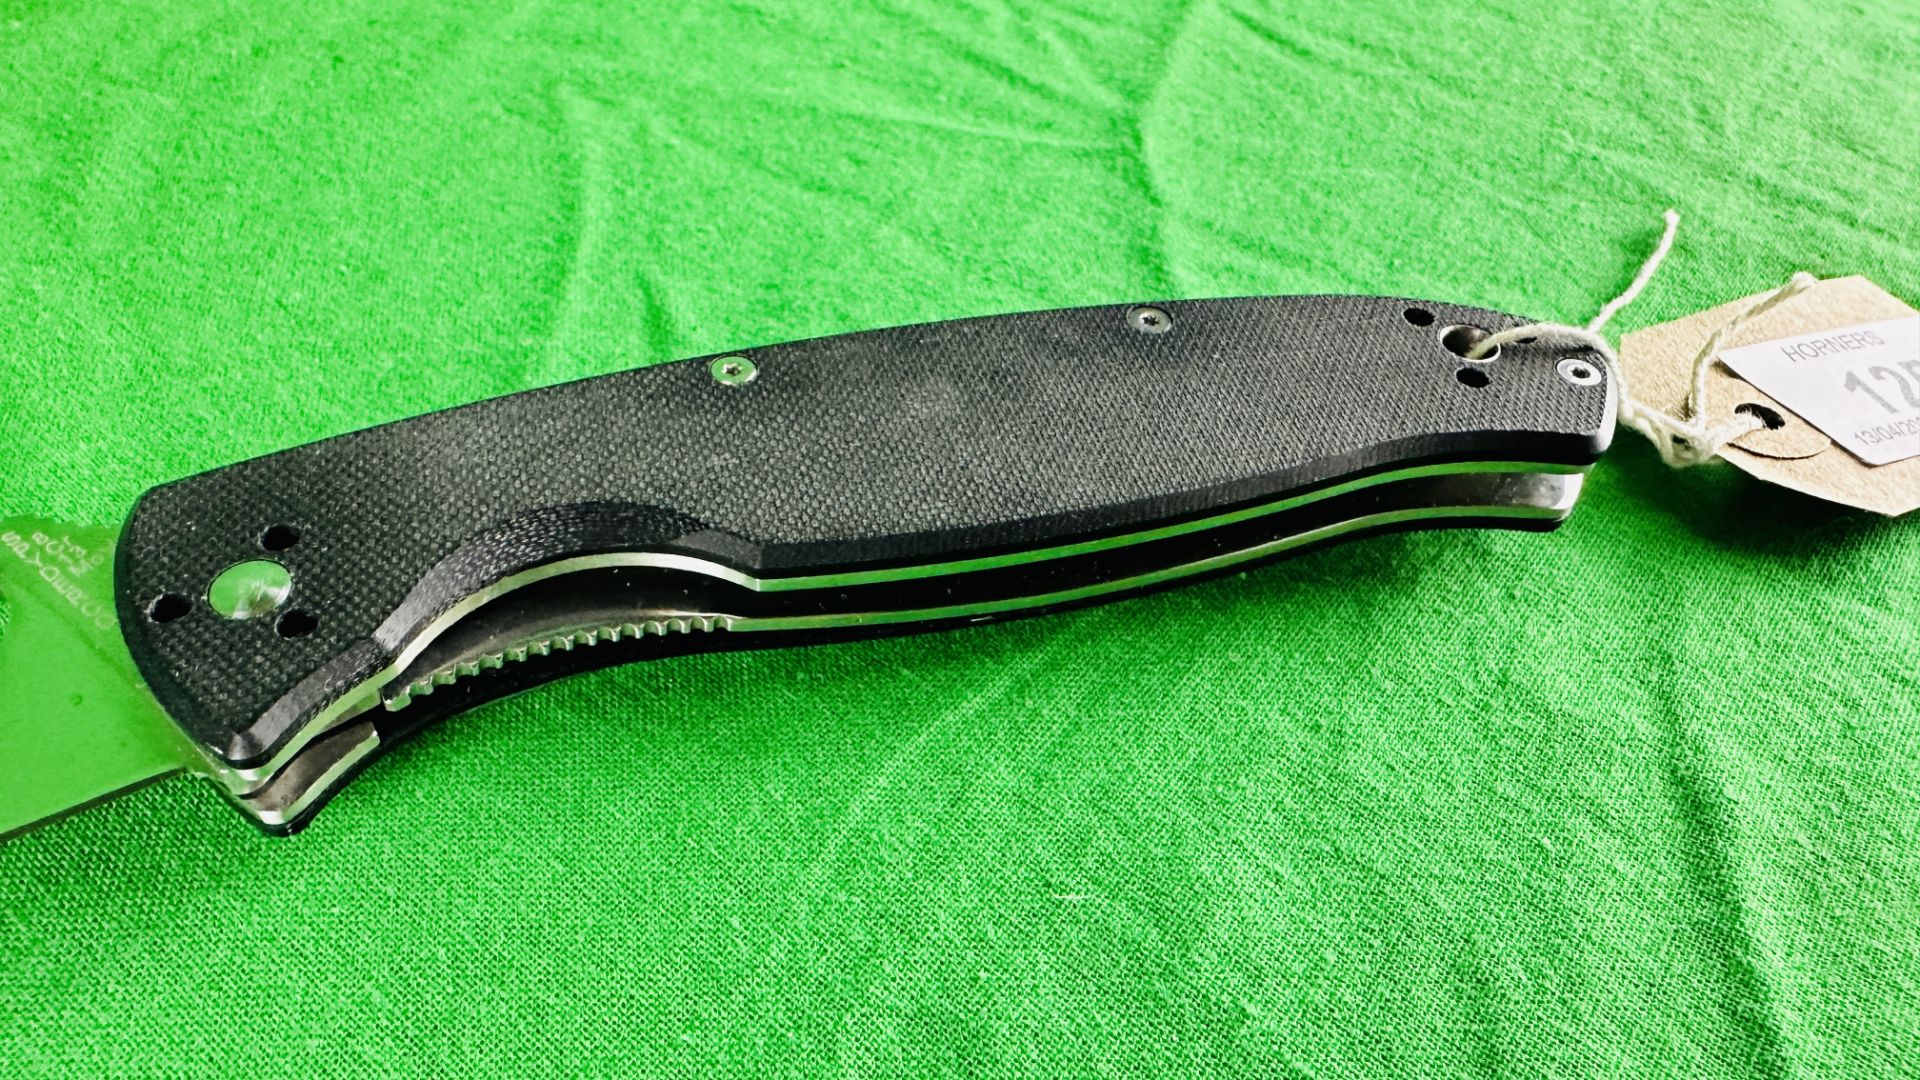 SYDERCO RESILIENCE C142GP FOLDING POCKET LOCK KNIFE - NO POSTAGE OR PACKING AVAILABLE - Image 5 of 7